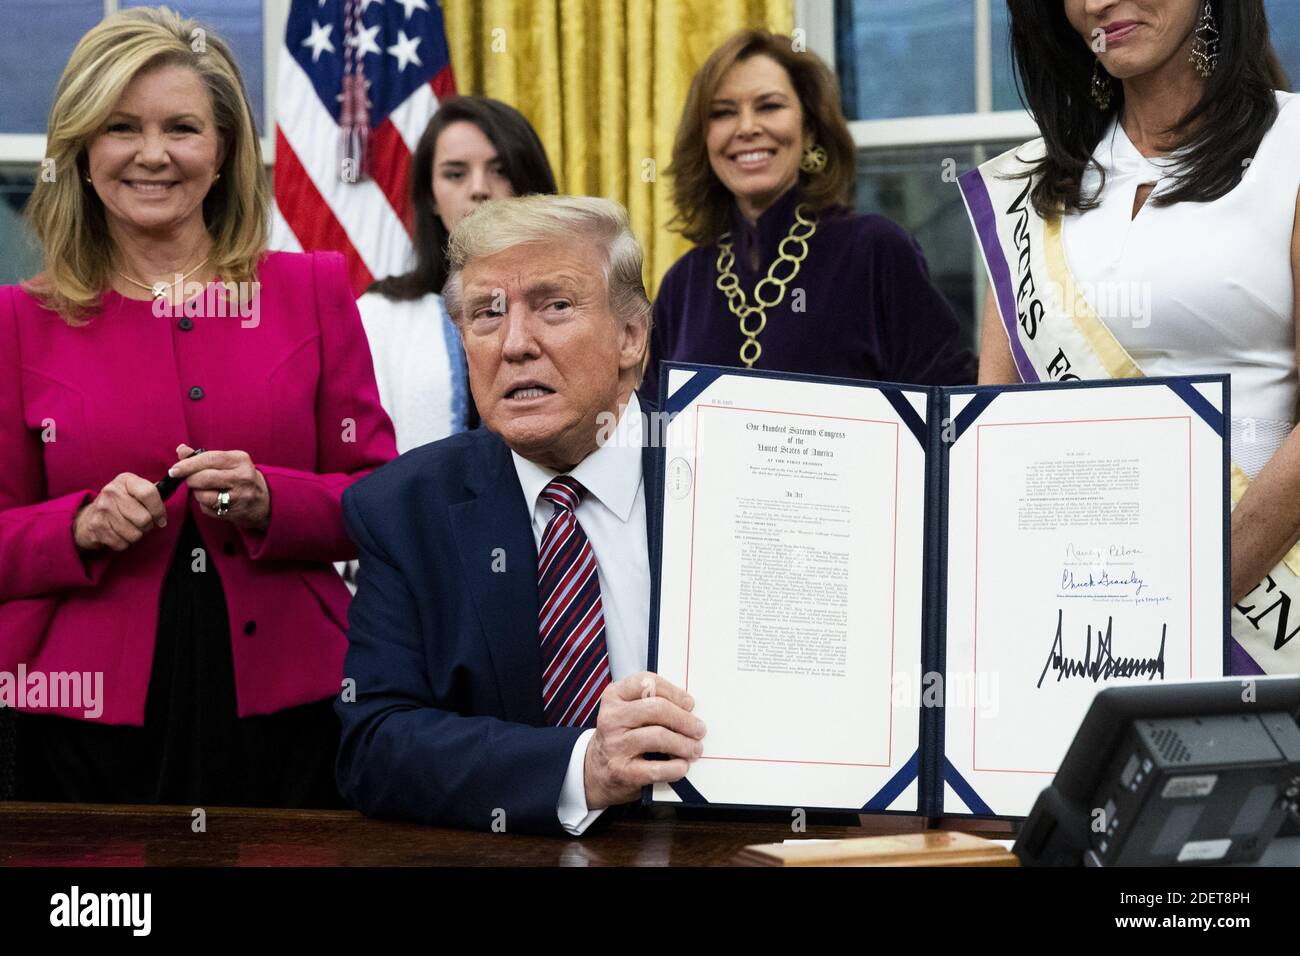 US President Donald J. Trump (C) holds up 'the WomenâÂ€Â™s Suffrage Centennial Commemorative Coin Act', after signing it during a ceremony, beside Republican Senator from Tennessee Marsha Blackburn (L), in the Oval Office of the White House in Washington, DC, USA, 25 November 2019. Trump signed 'H.R. 2423, the WomenâÂ€Â™s Suffrage Centennial Commemorative Coin Act' - a bill directing the US Treasury to mint and issue up to four hundred thousand one-dollar silver coins honoring women that played a role in gathering support for the 19th Amendment. Photo by Michael Reynaolds/Pool/ABACAPRESS.COM Stock Photo